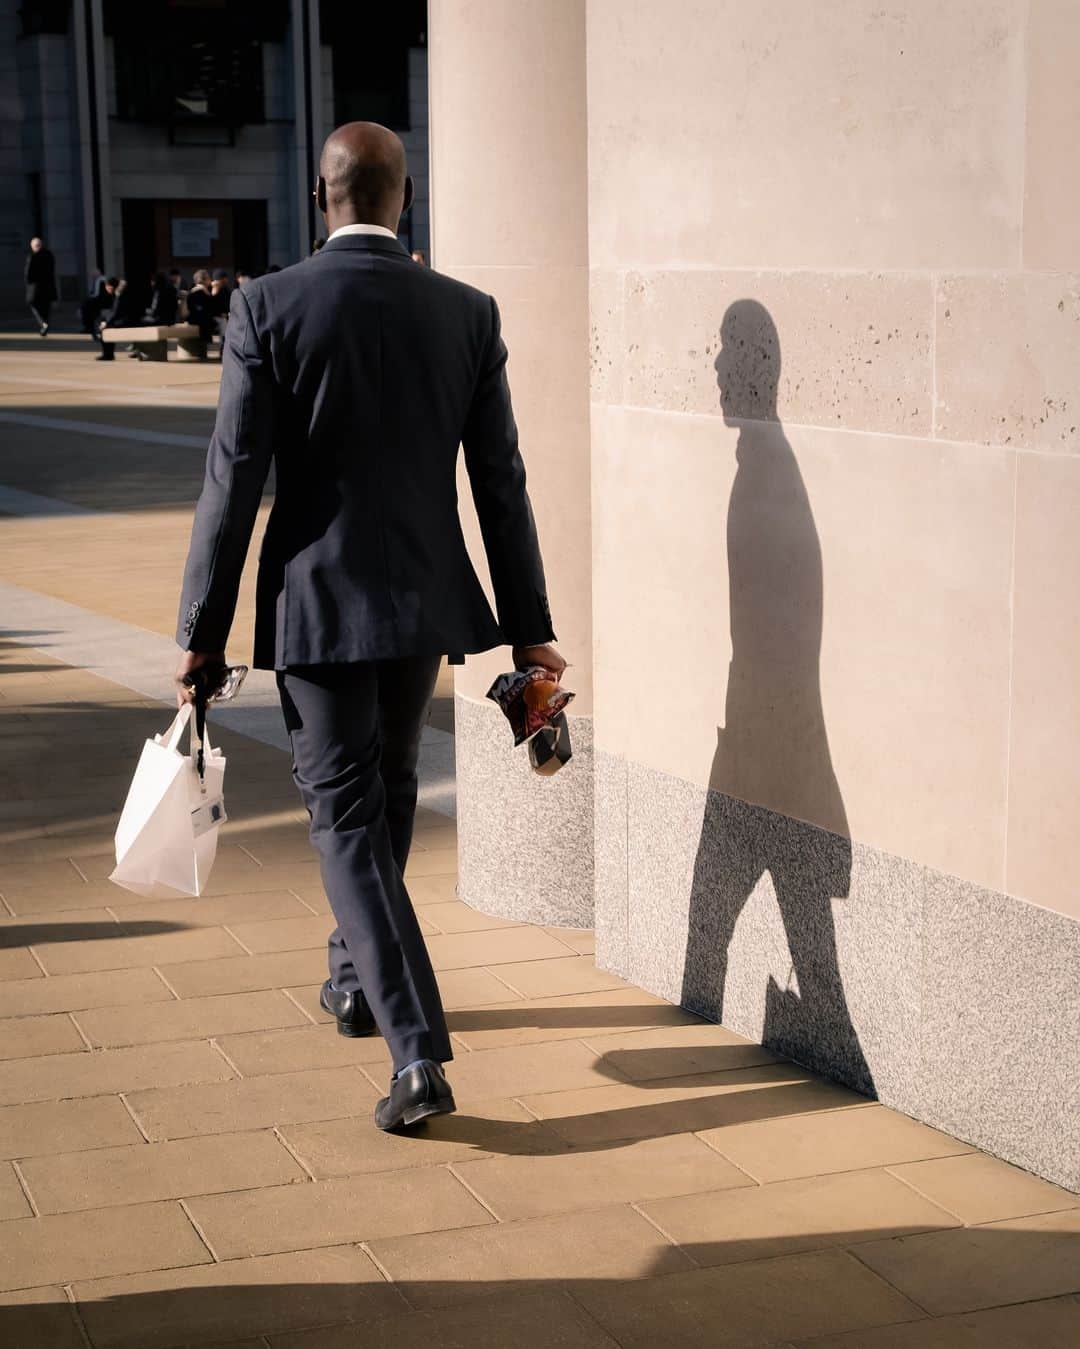 Fujifilm UKのインスタグラム：「“I took this shot in St. Pauls, London. Often I’m looking to capture a facial expression or particularly interesting action. This shot, however, is slightly different. With the subject facing away from the camera, the focal point becomes his shadow on the wall, adding a bit of mystery to the image.”  📸: @mesbkr   #FUJIFILMXT30 XF 18-55mmF2.8-4 R LM OIS f/5, ISO 640, 1/500 sec」